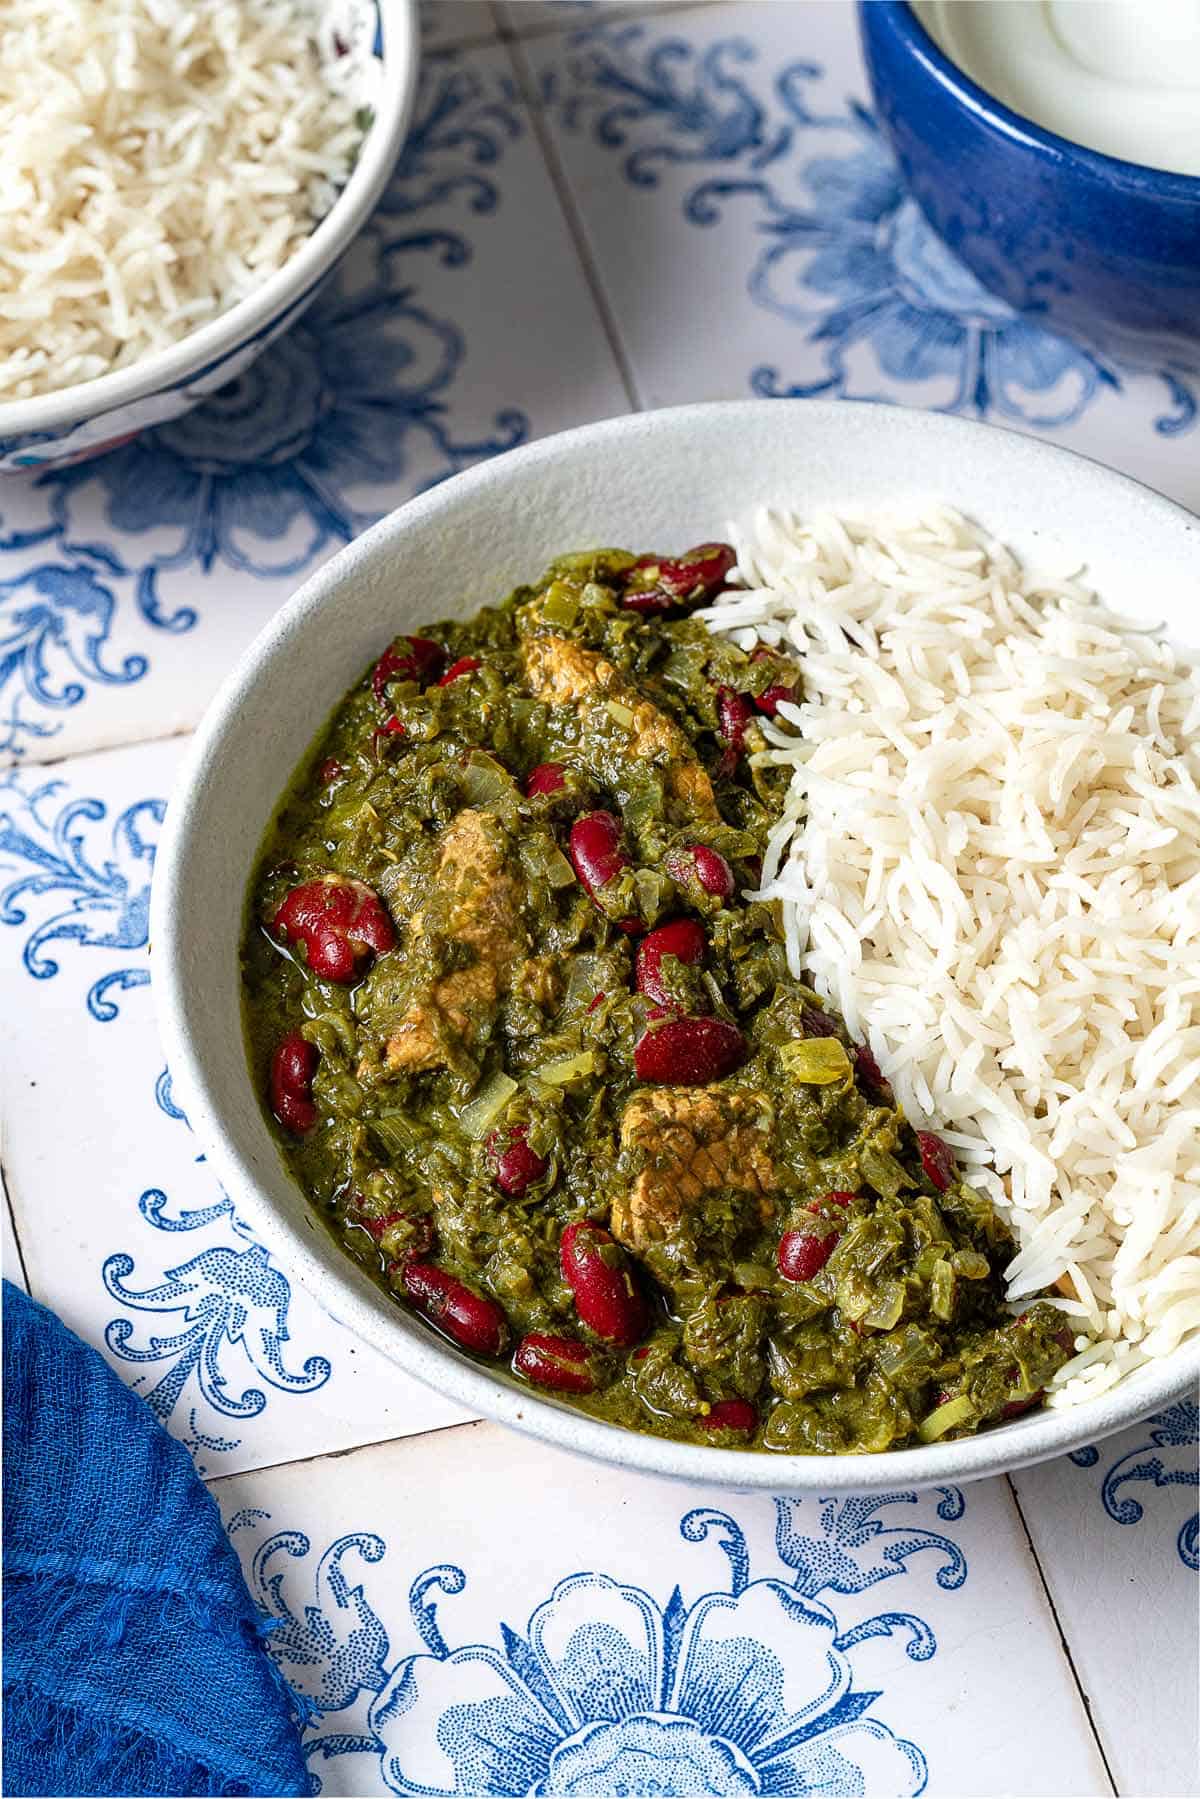 Ghormeh sabzi in a bowl with rice. In the background, there is another bowl of rice.